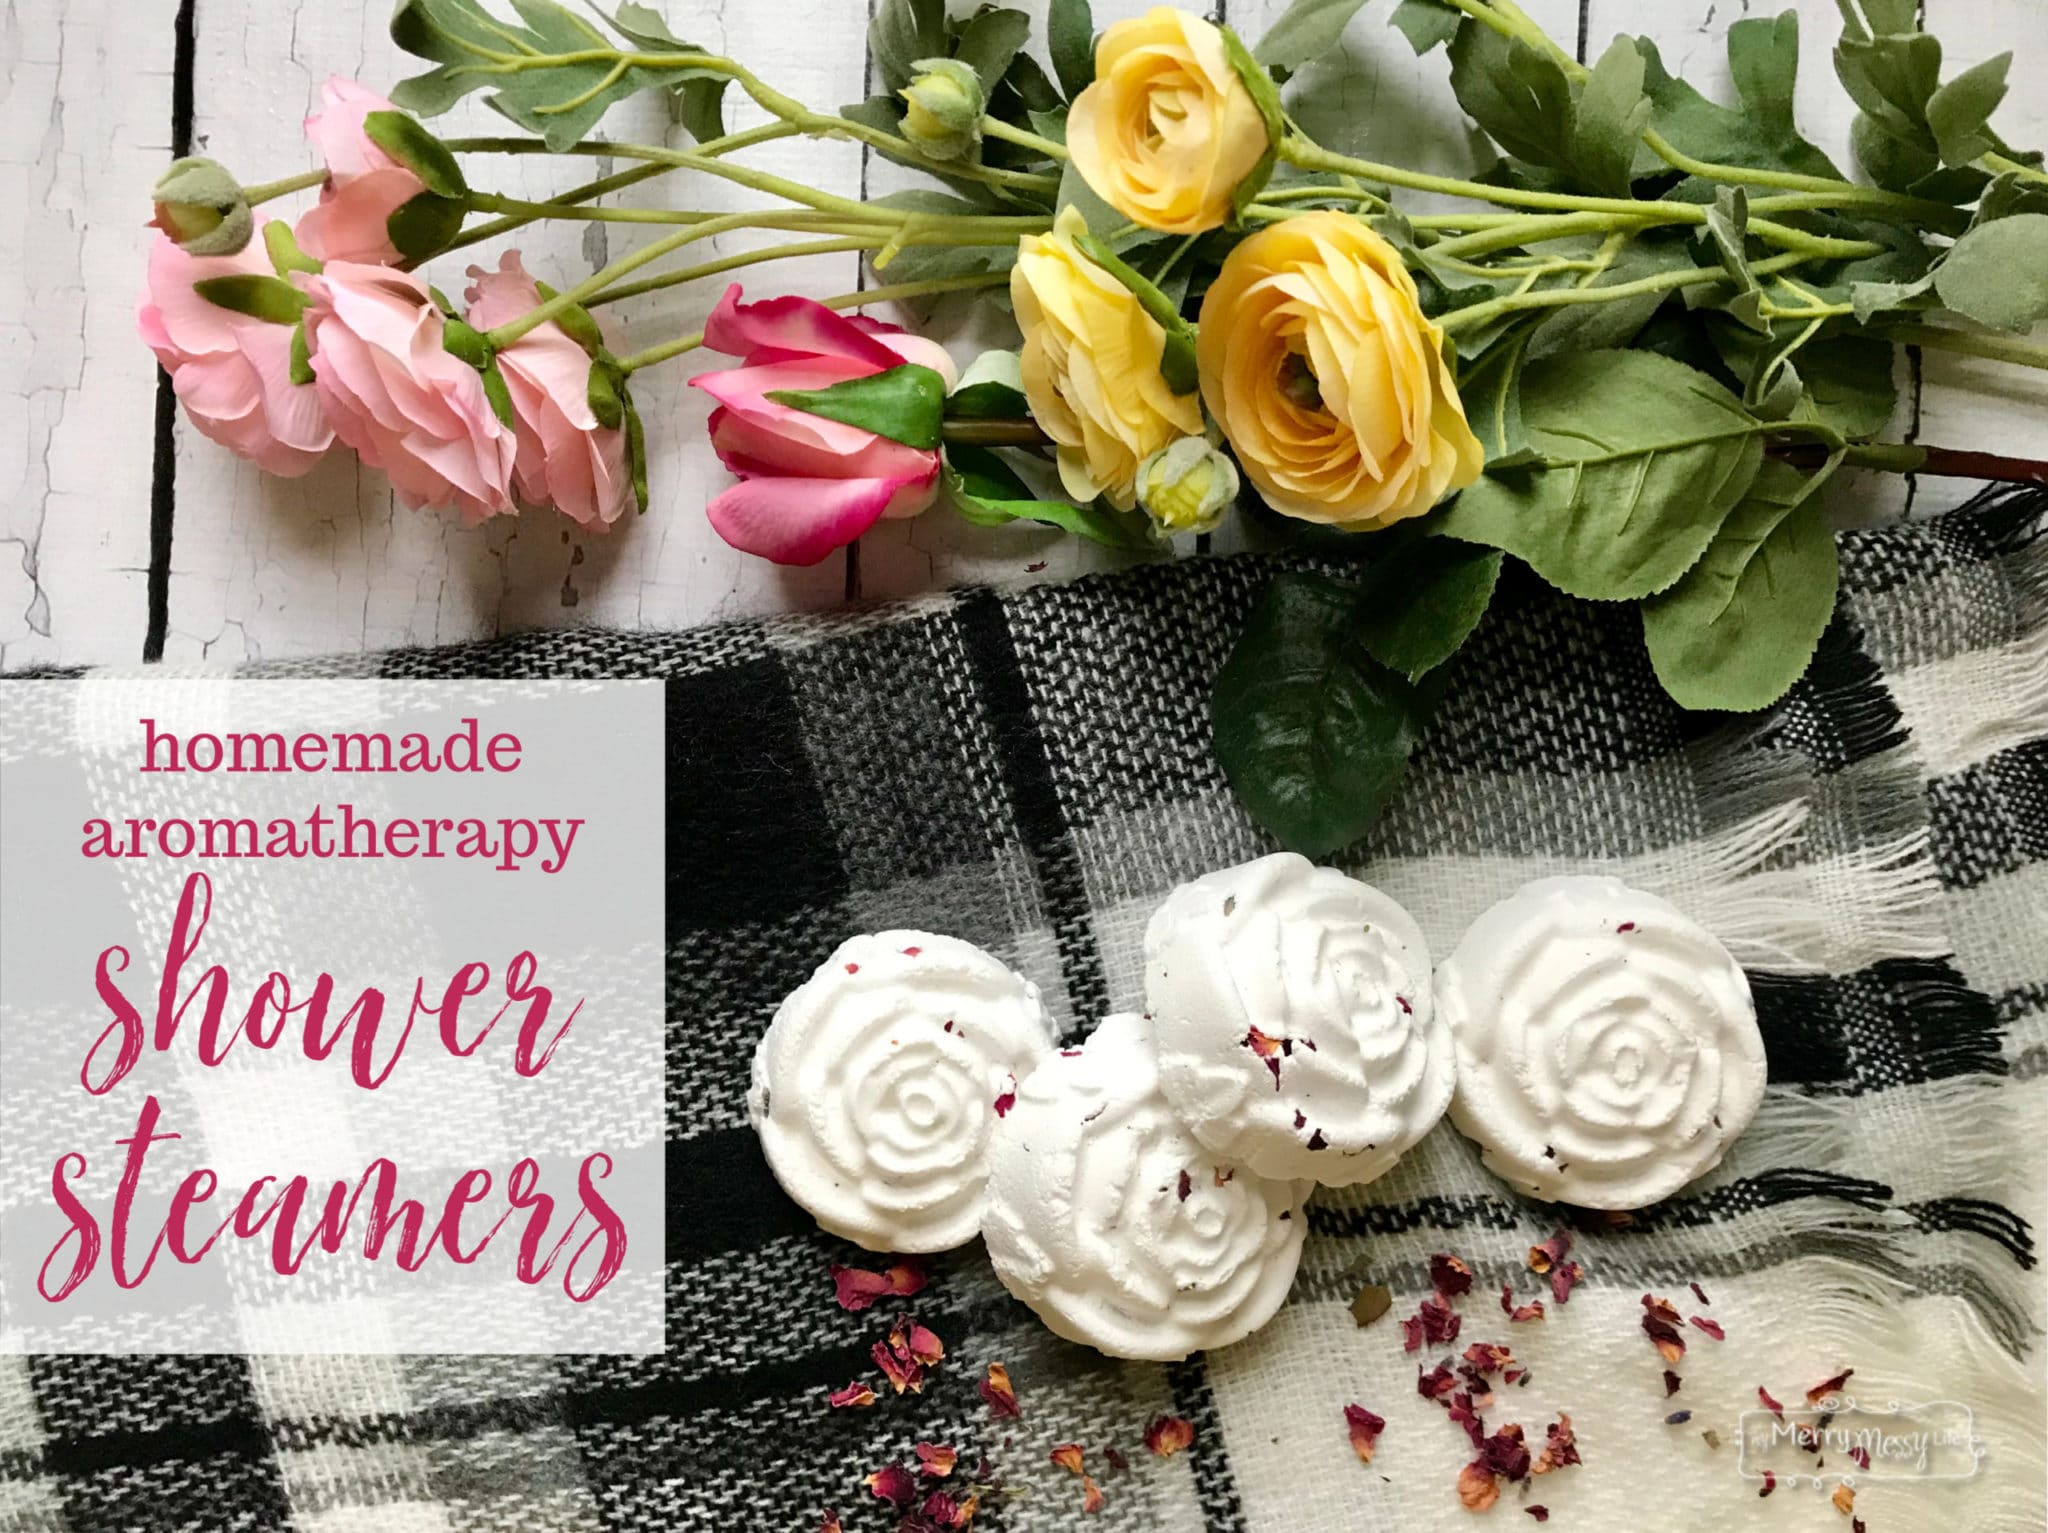 DIY Aromatherapy Shower Steamers using Essential Oils, Baking Soda, Citric Acid and more!